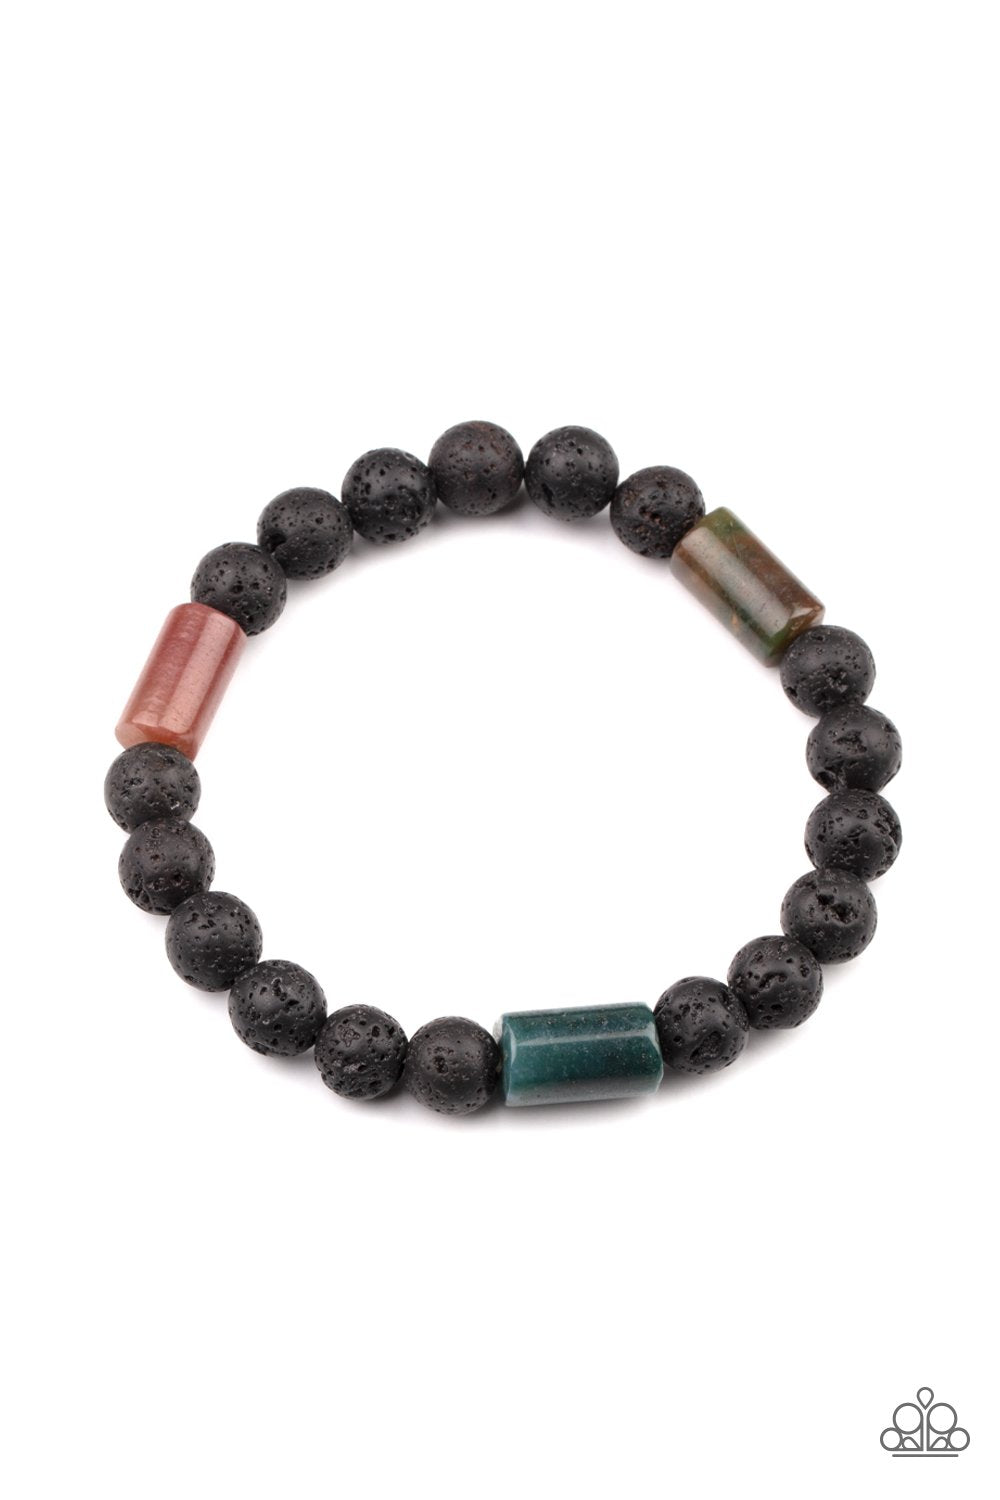 Earthy Energy Green and Black Lava Rock Bracelet - Paparazzi Accessories- lightbox - CarasShop.com - $5 Jewelry by Cara Jewels